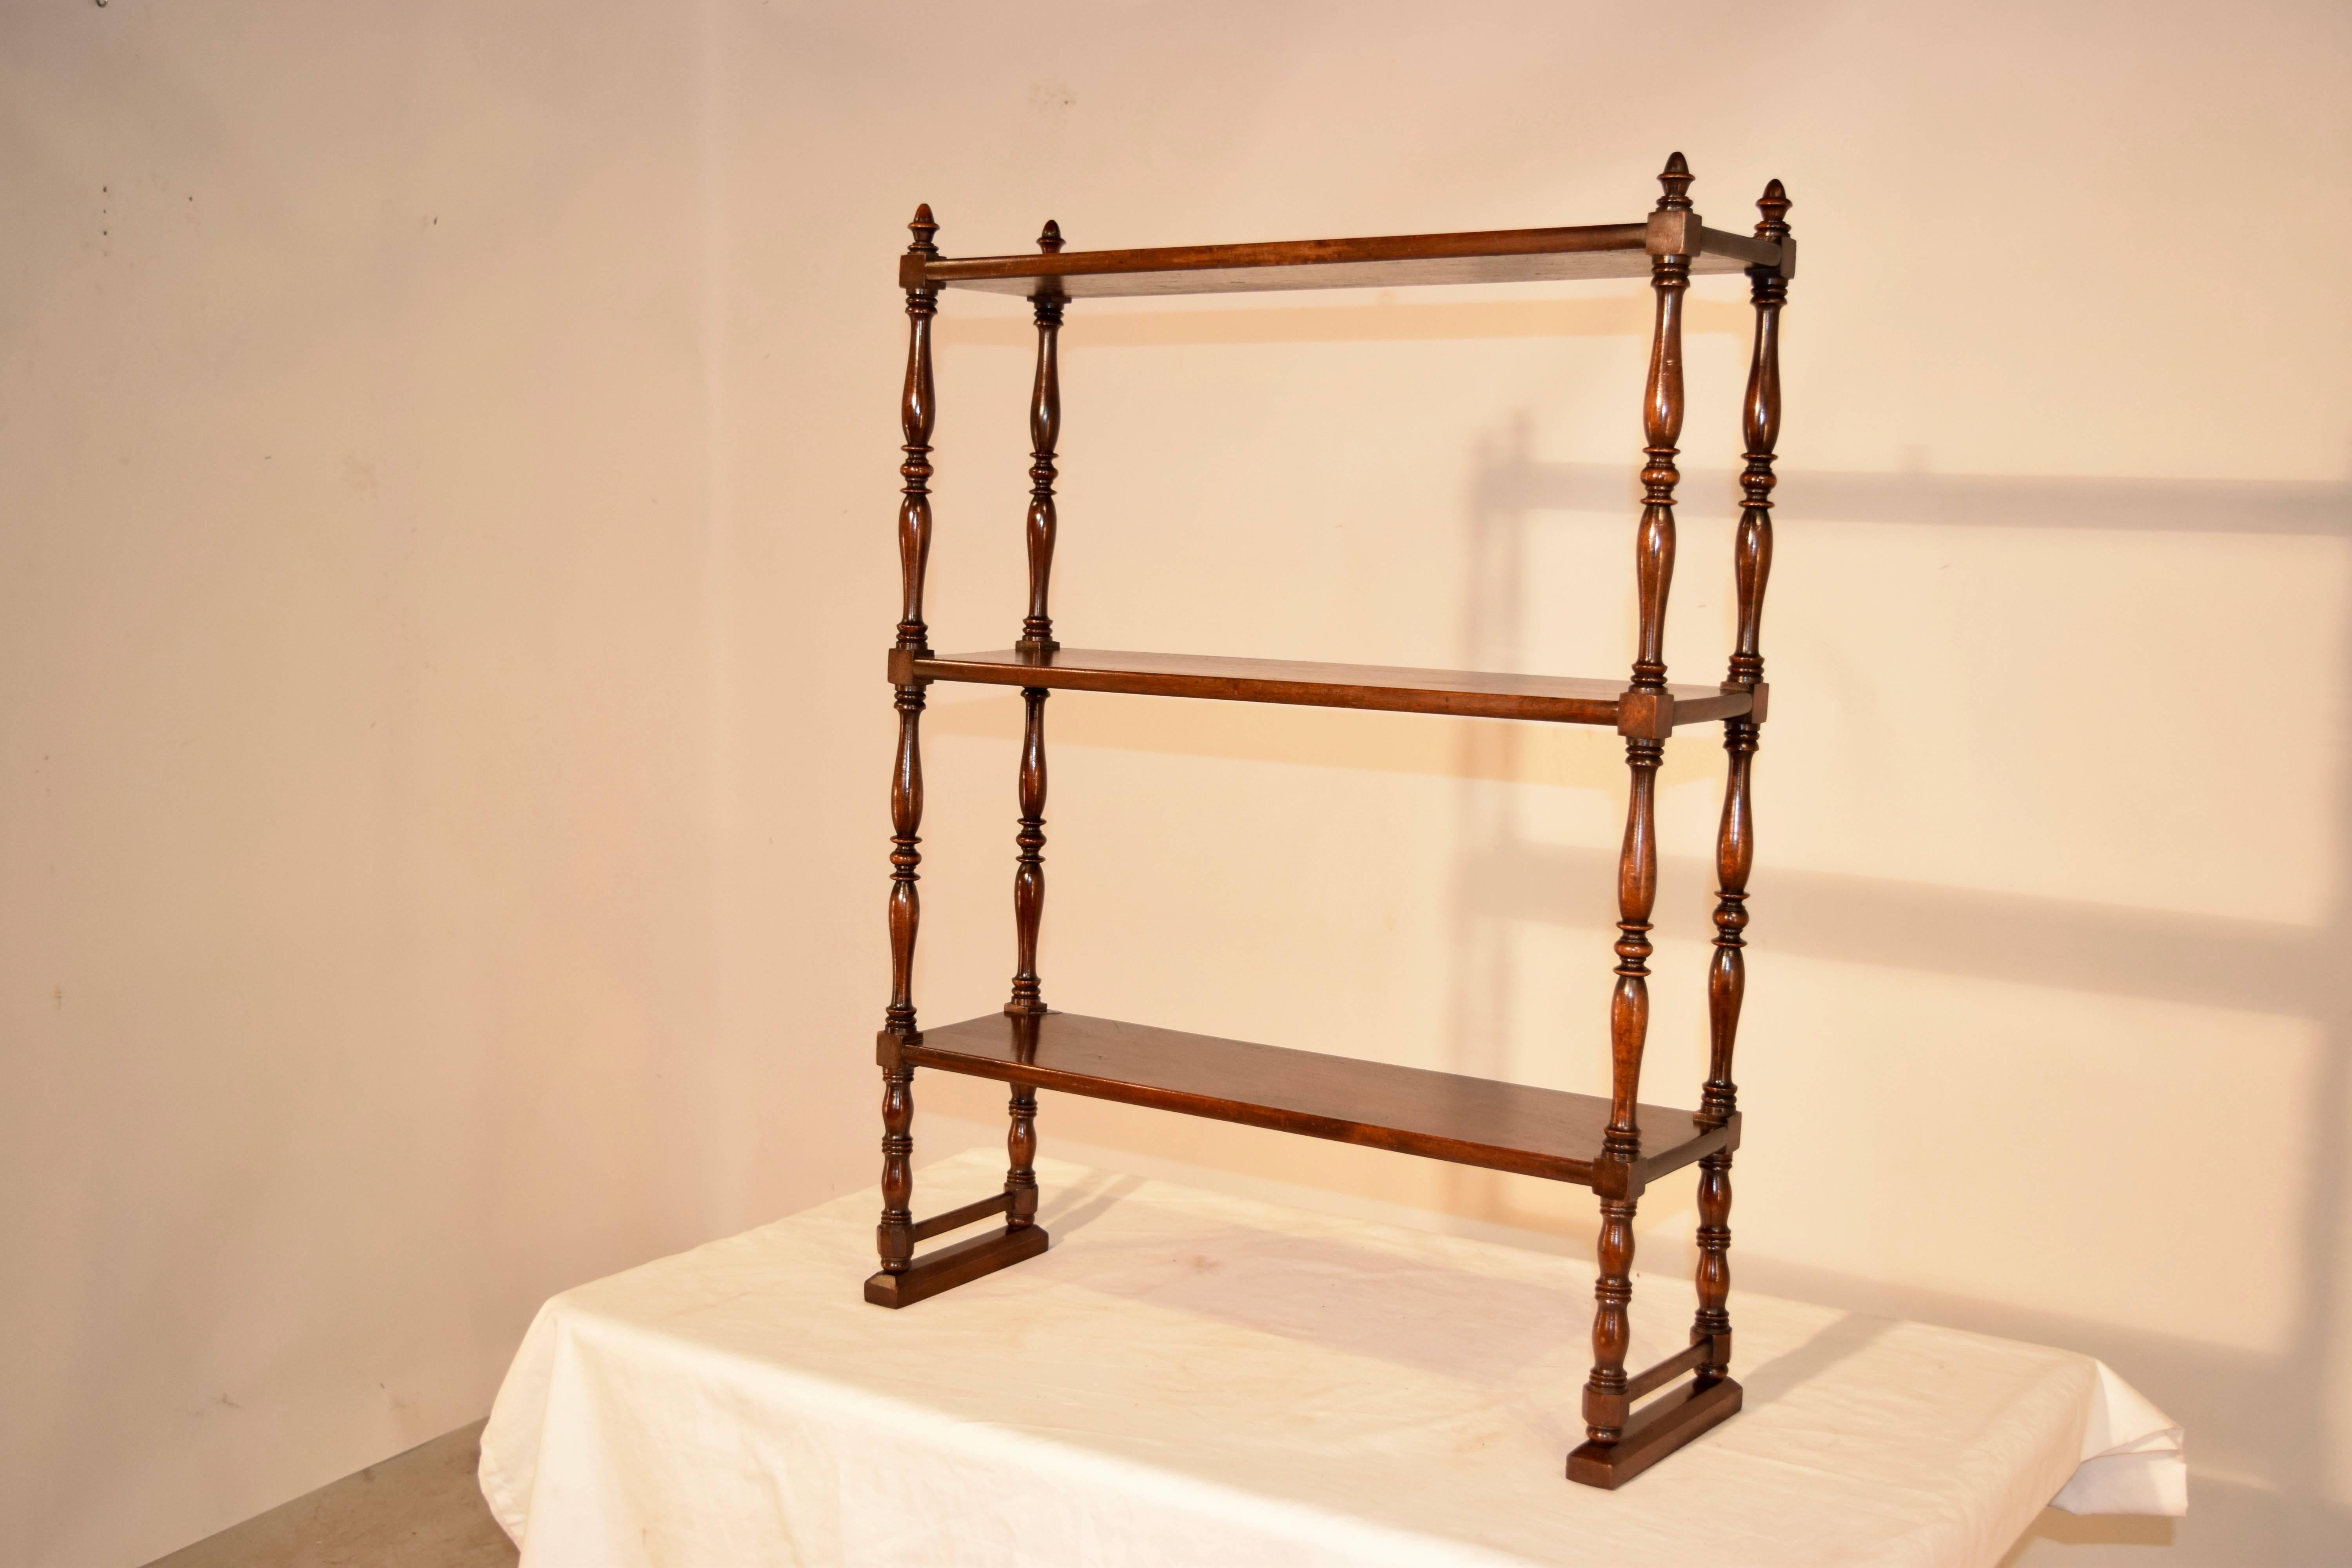 19th century mahogany small standing shelf from England. It has three shelves, one which has a small old repair, and separated by hand-turned shelf supports. Great size.